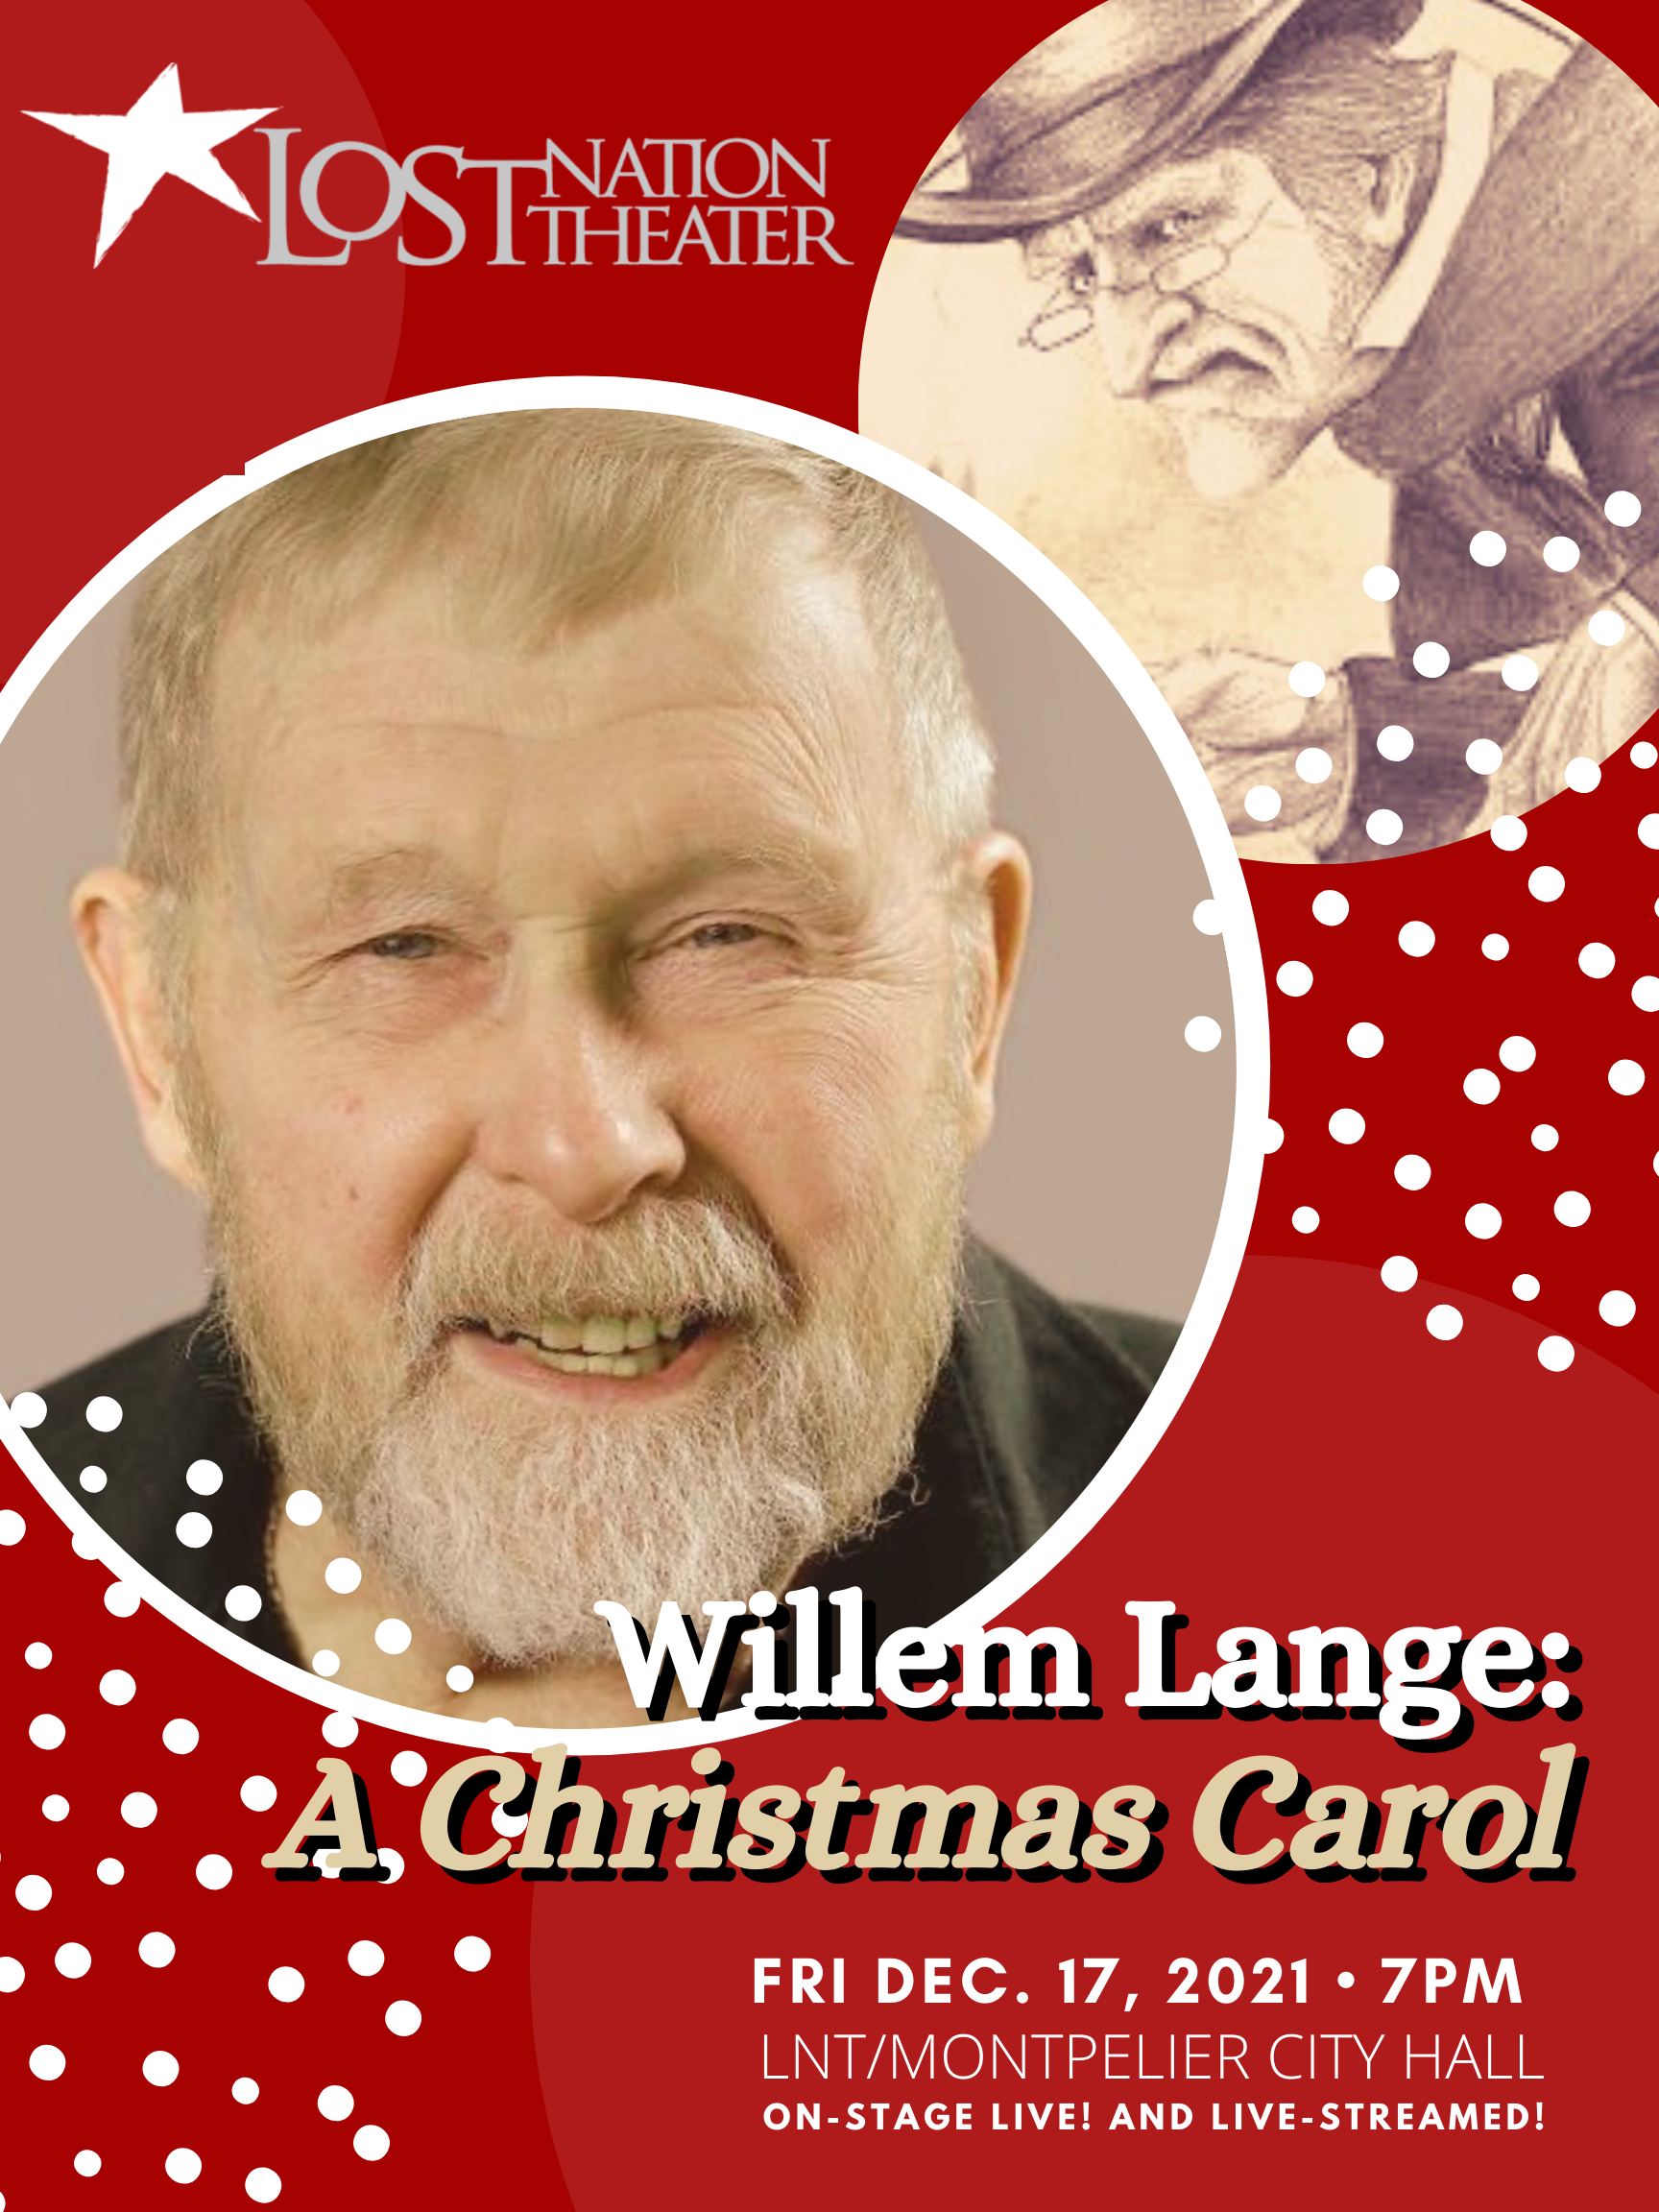 poster of Willem Lange for reading of A Christmas Carol